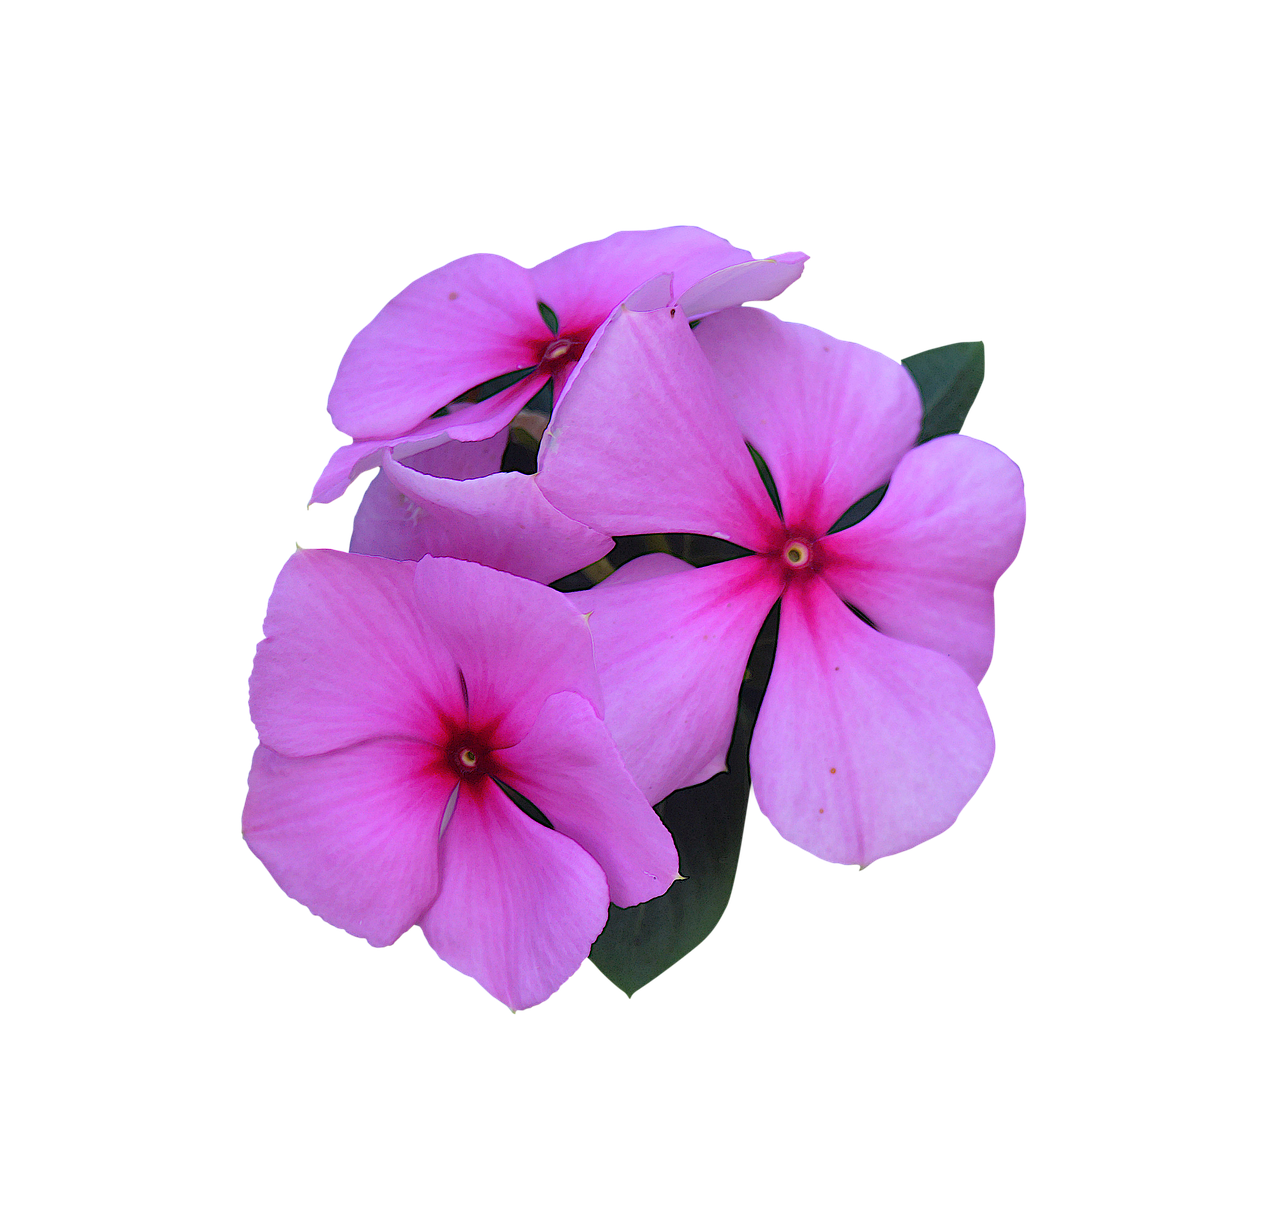 image cropped cutout pink flowers free photo